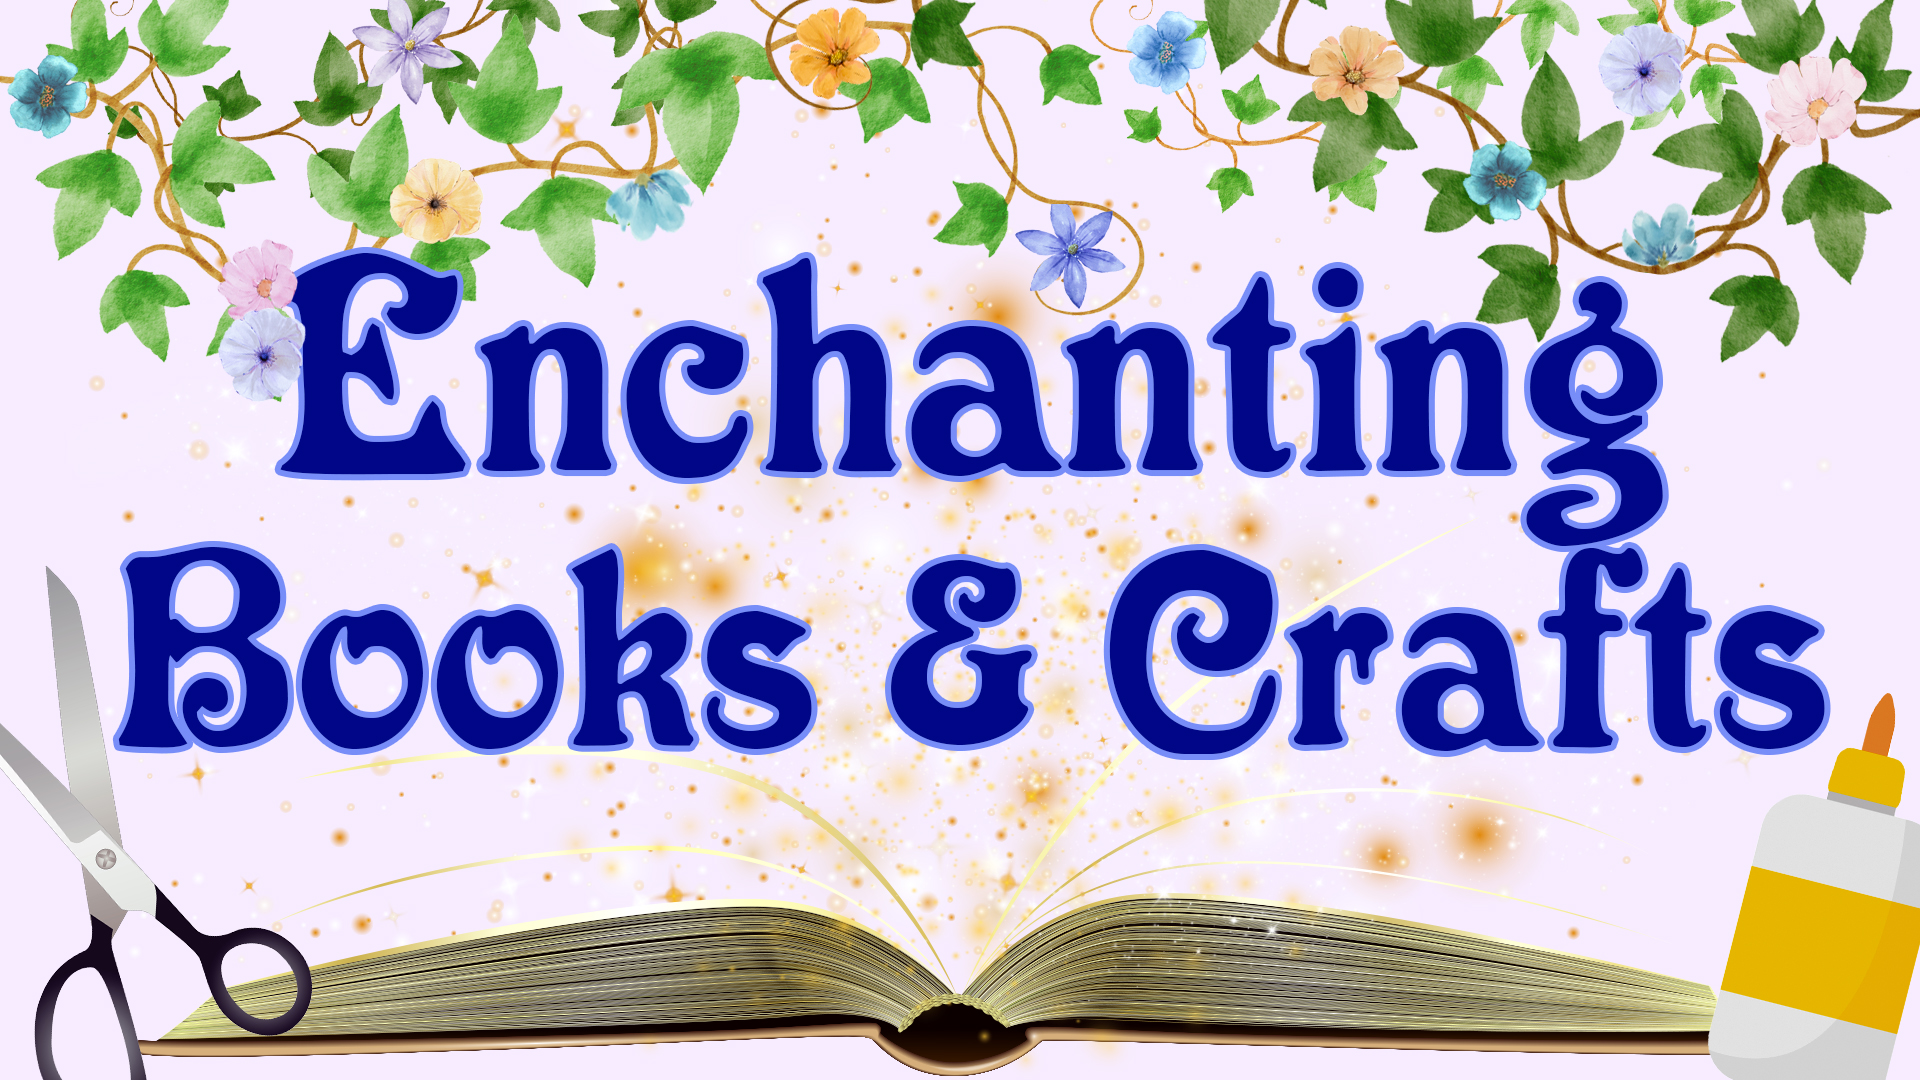 Image reads "Enchanting Books & Crafts" in navy blue against a light purple background. An open book with magic sparkles coming out of the pages in behind the title. At the top of the image are watercolor vines with flowers of various colors among the vines. A pair of scissors is to the left of the title and a glue bottle is to the right of the title.